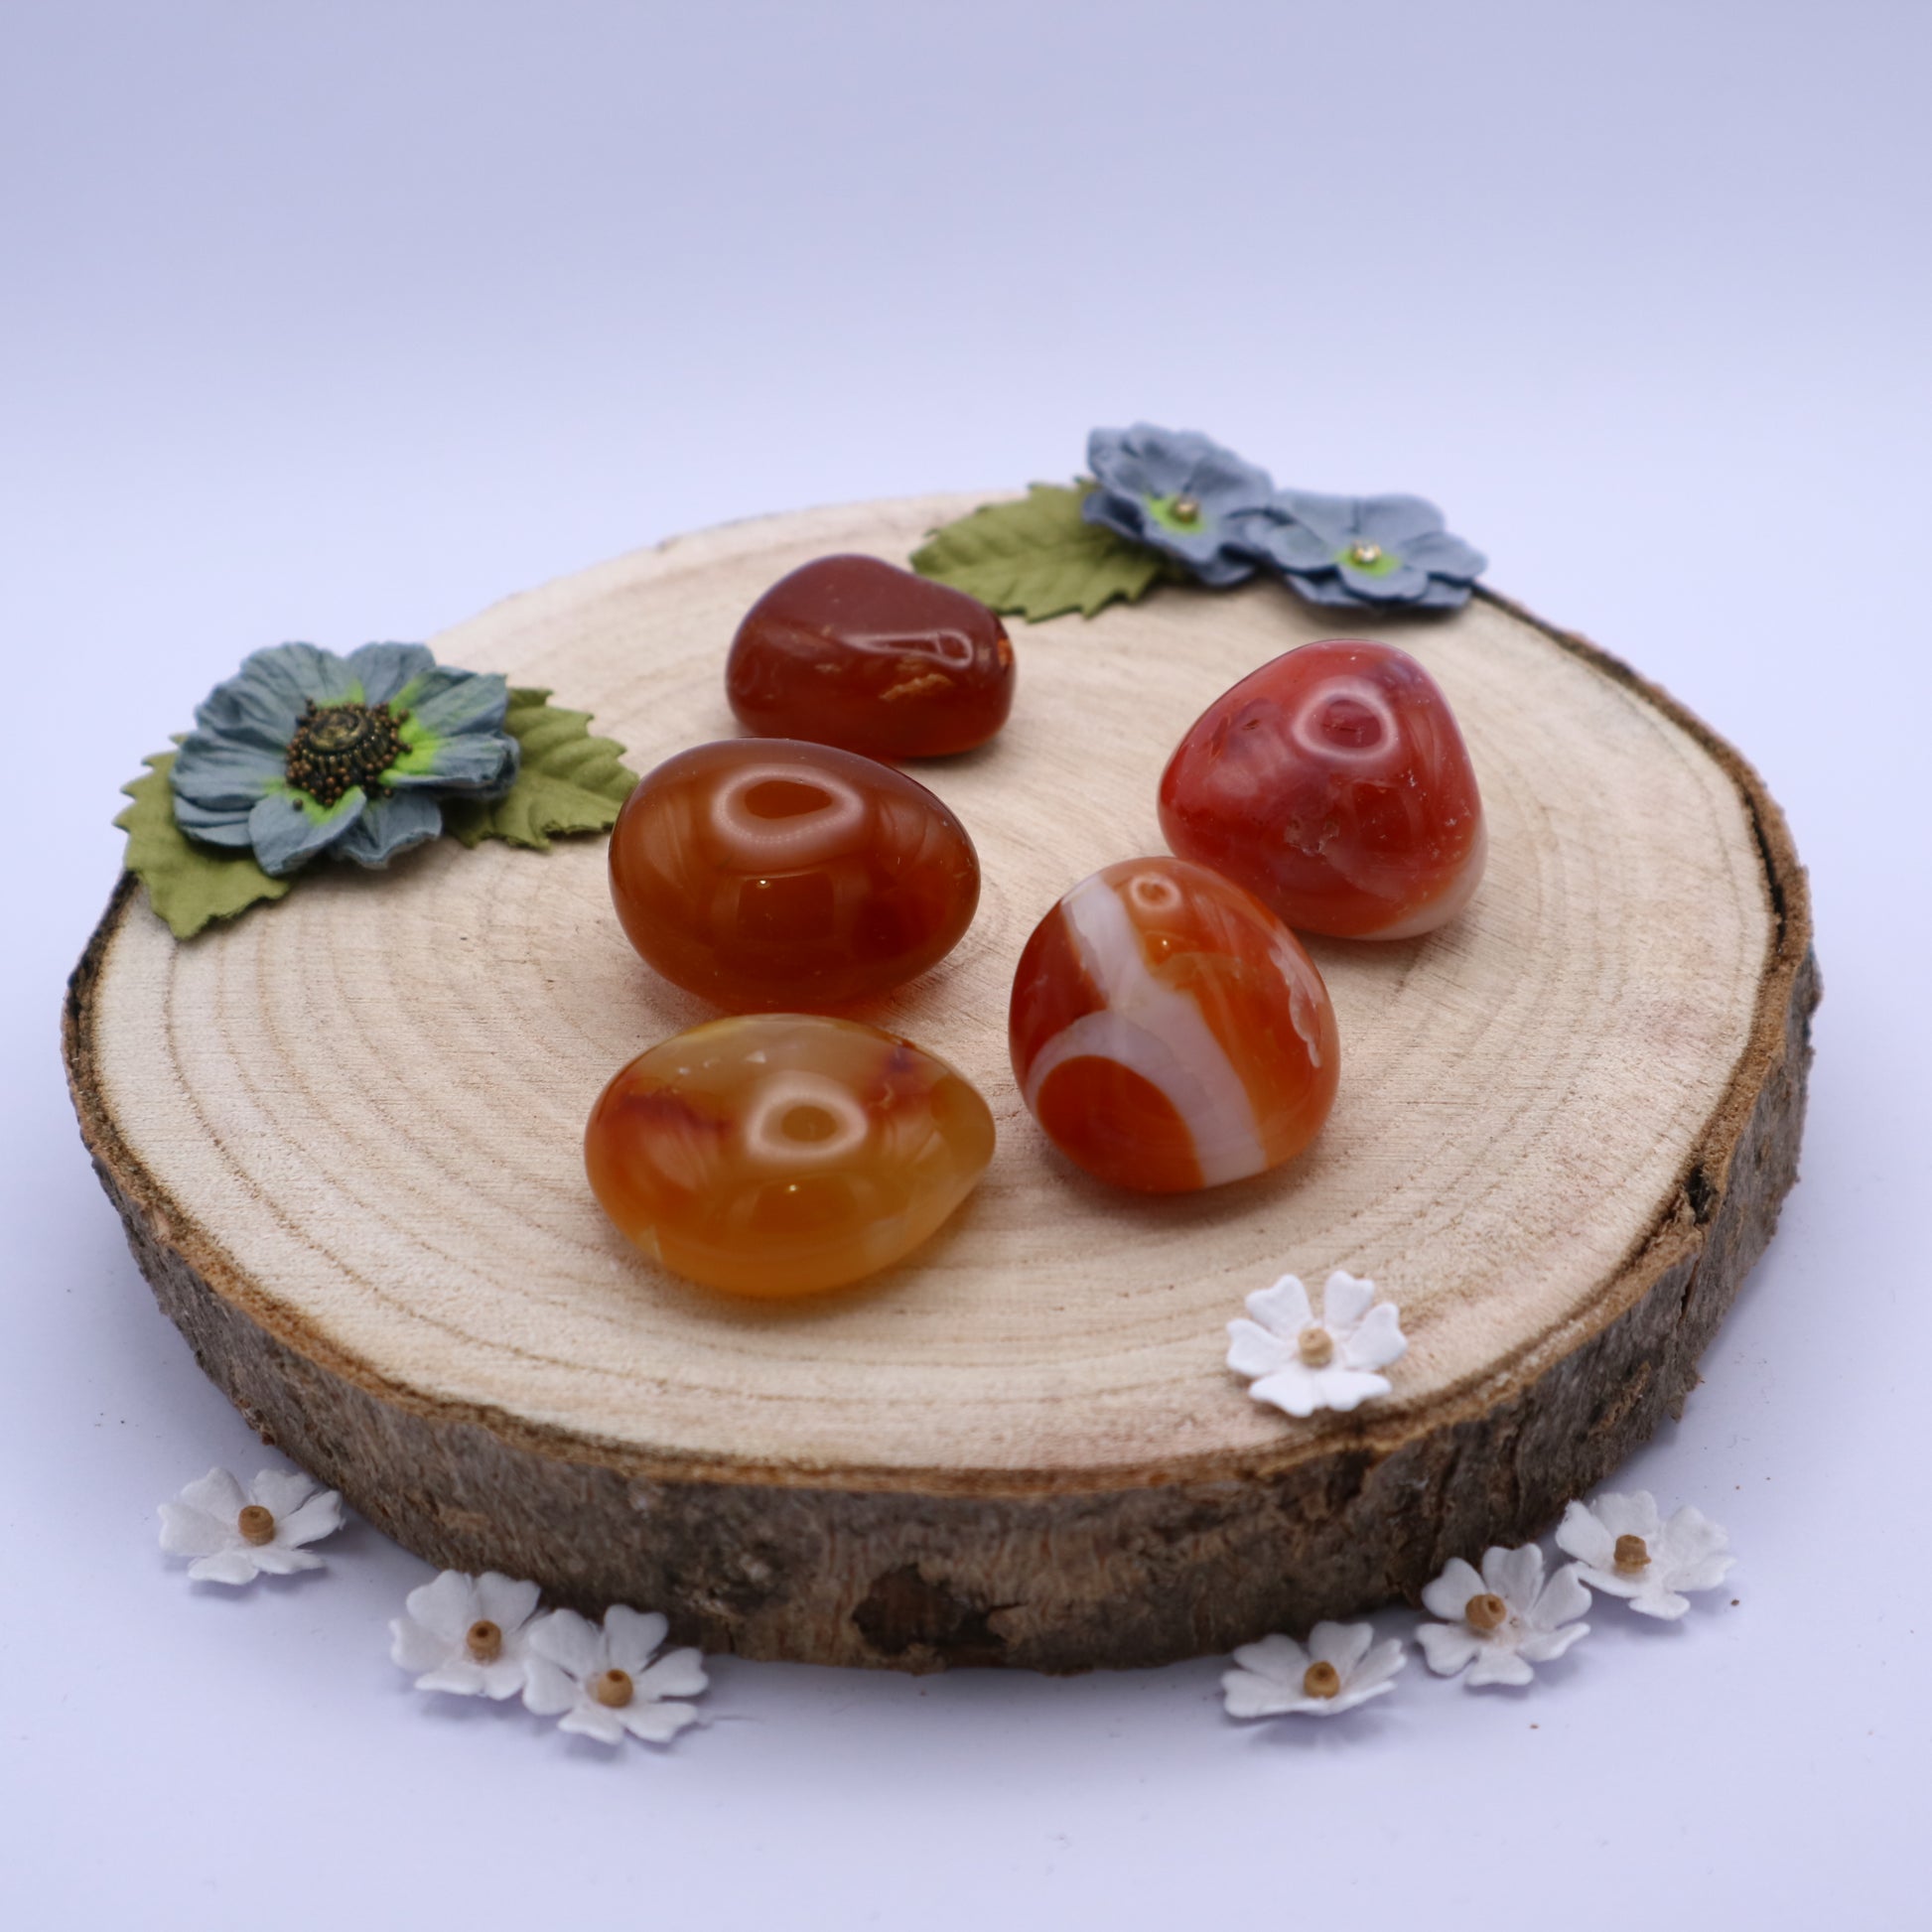 Five pieces of Carnelian crystals displayed on a piece of wood surrounded by flowers